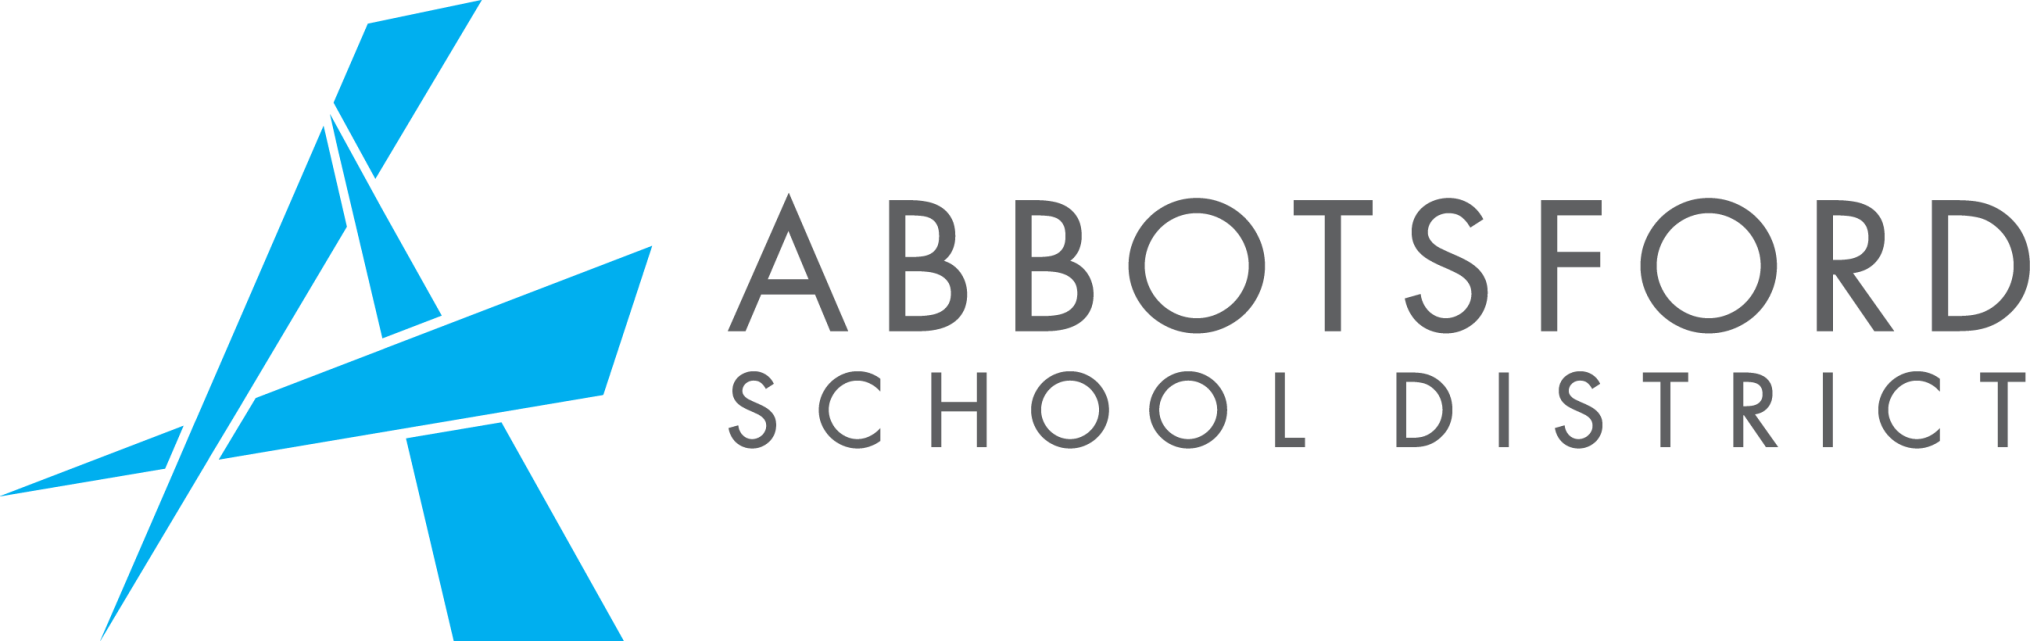 Blue "A" logo and Abbotsford School District text